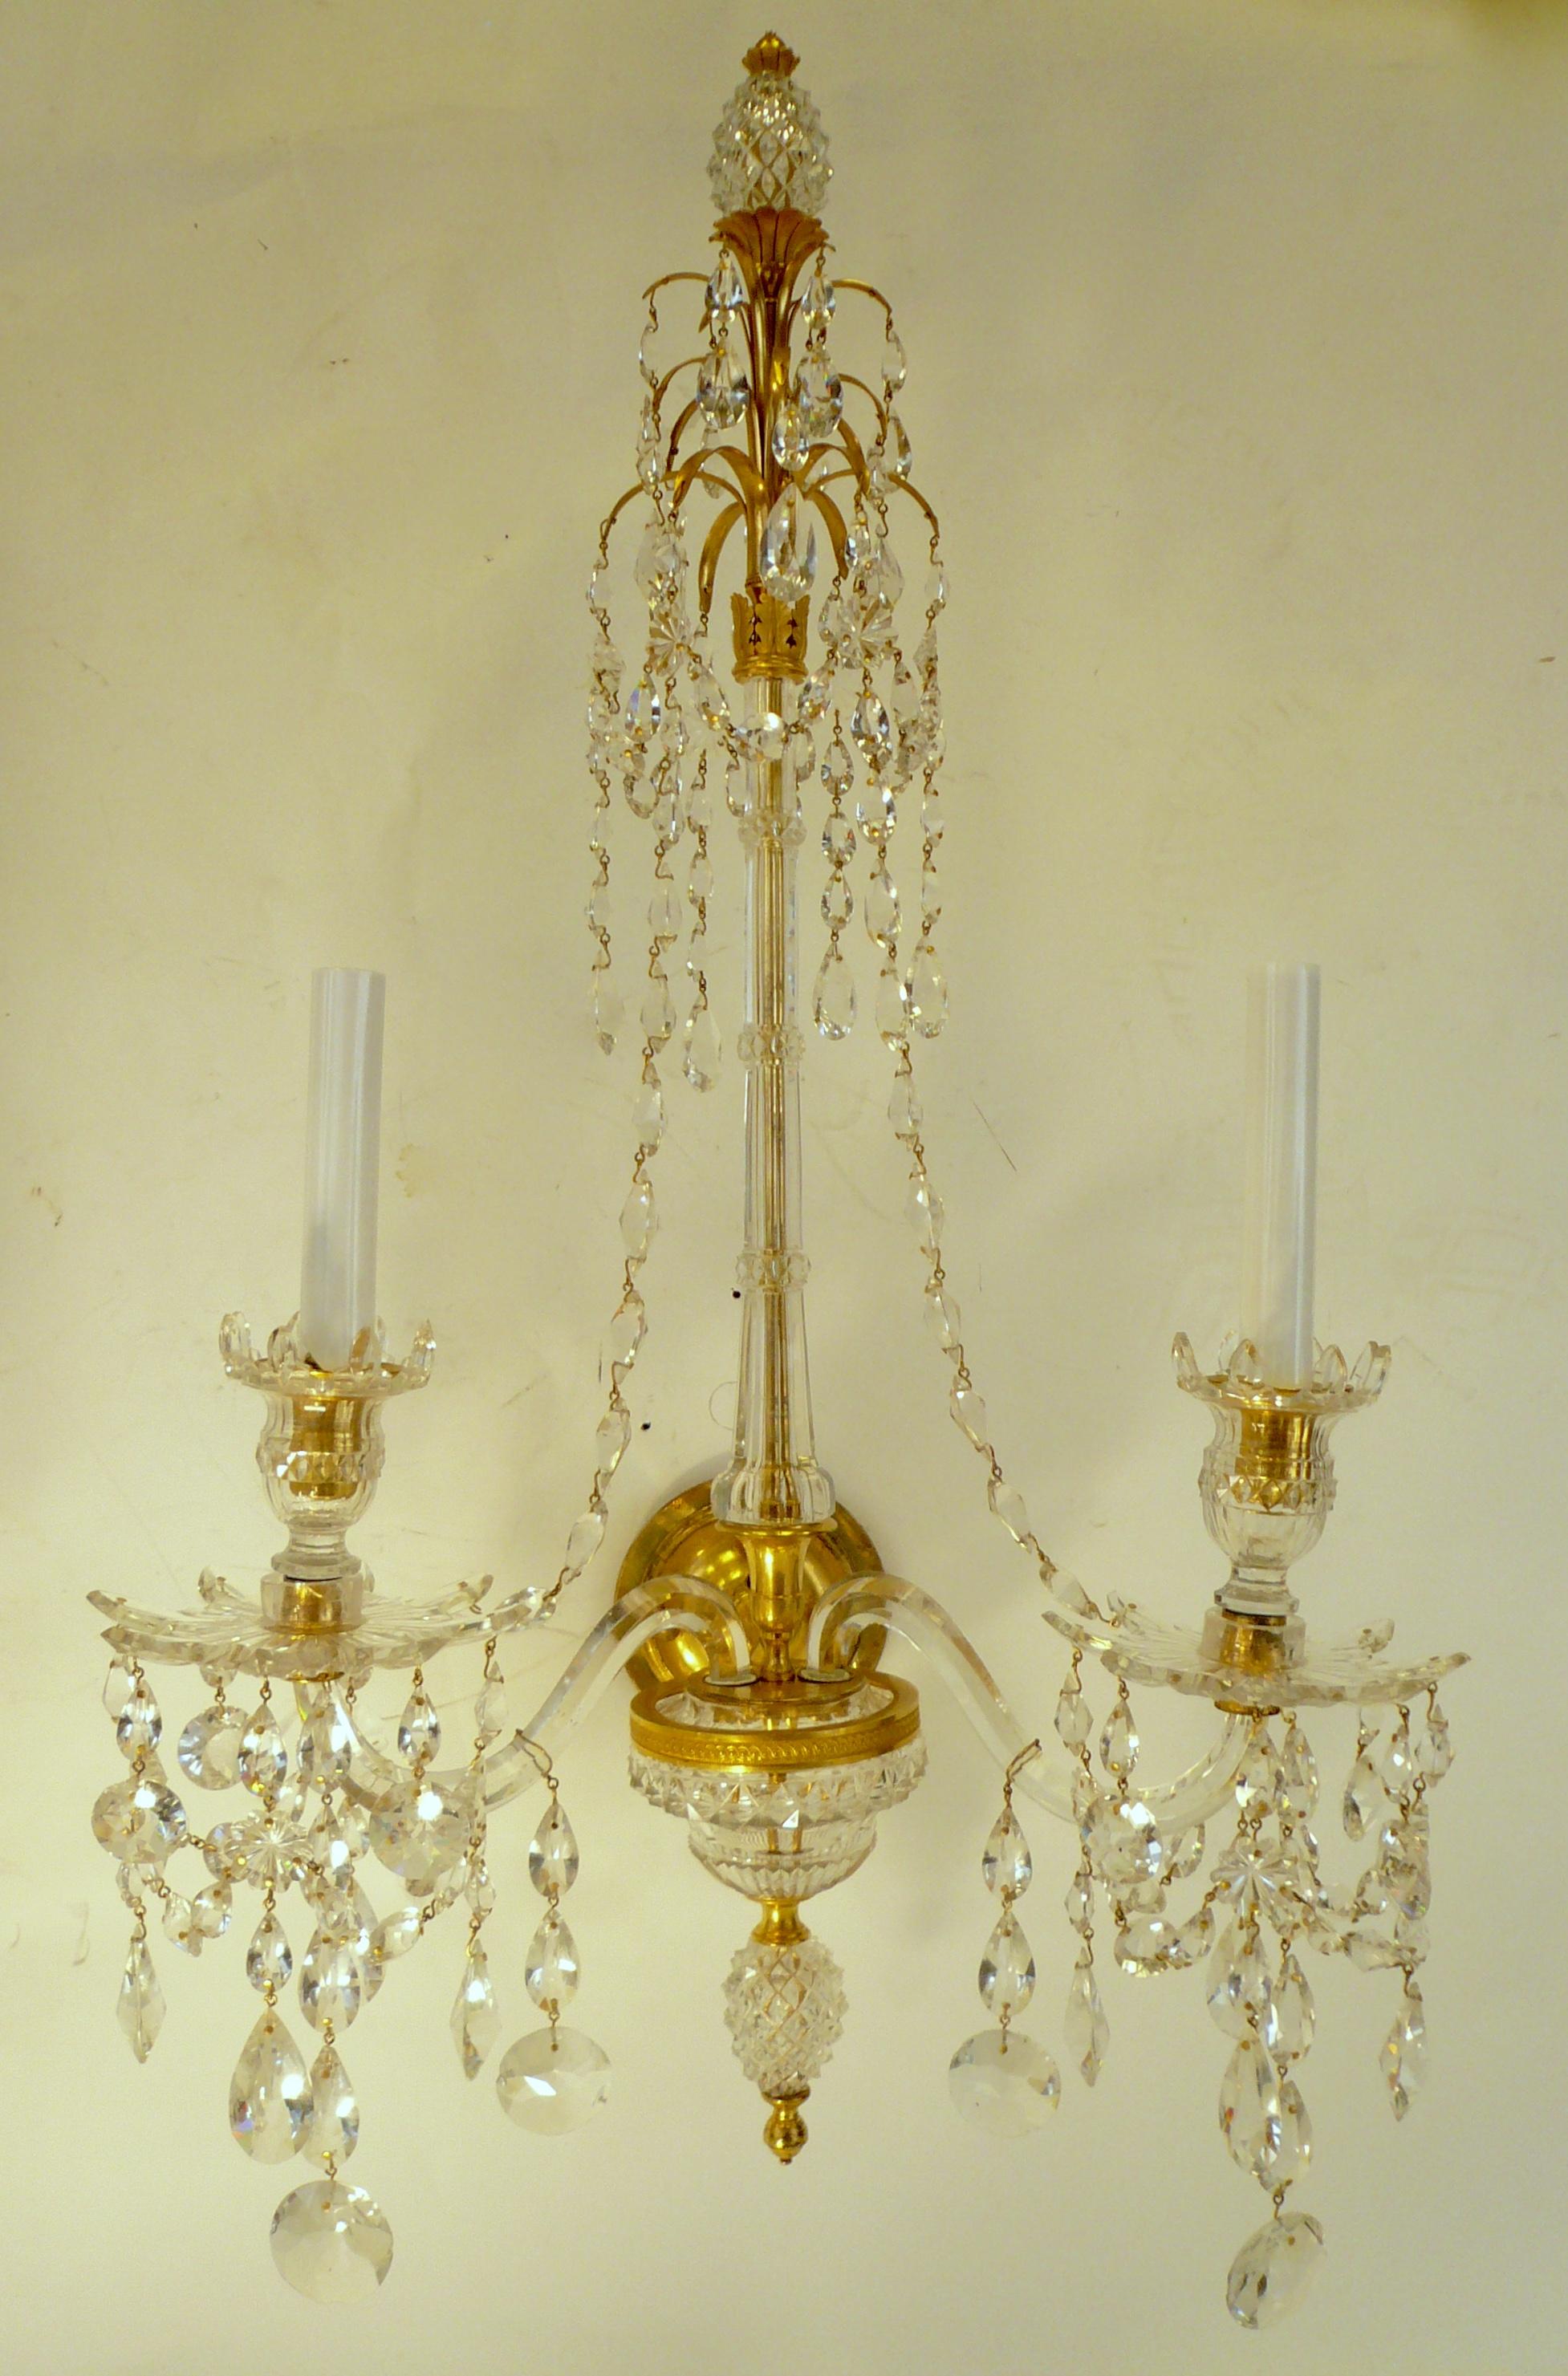 Exquisite Pair of Georgian Sconces in the Adam Style, Attributed to Wm. Parker For Sale 8